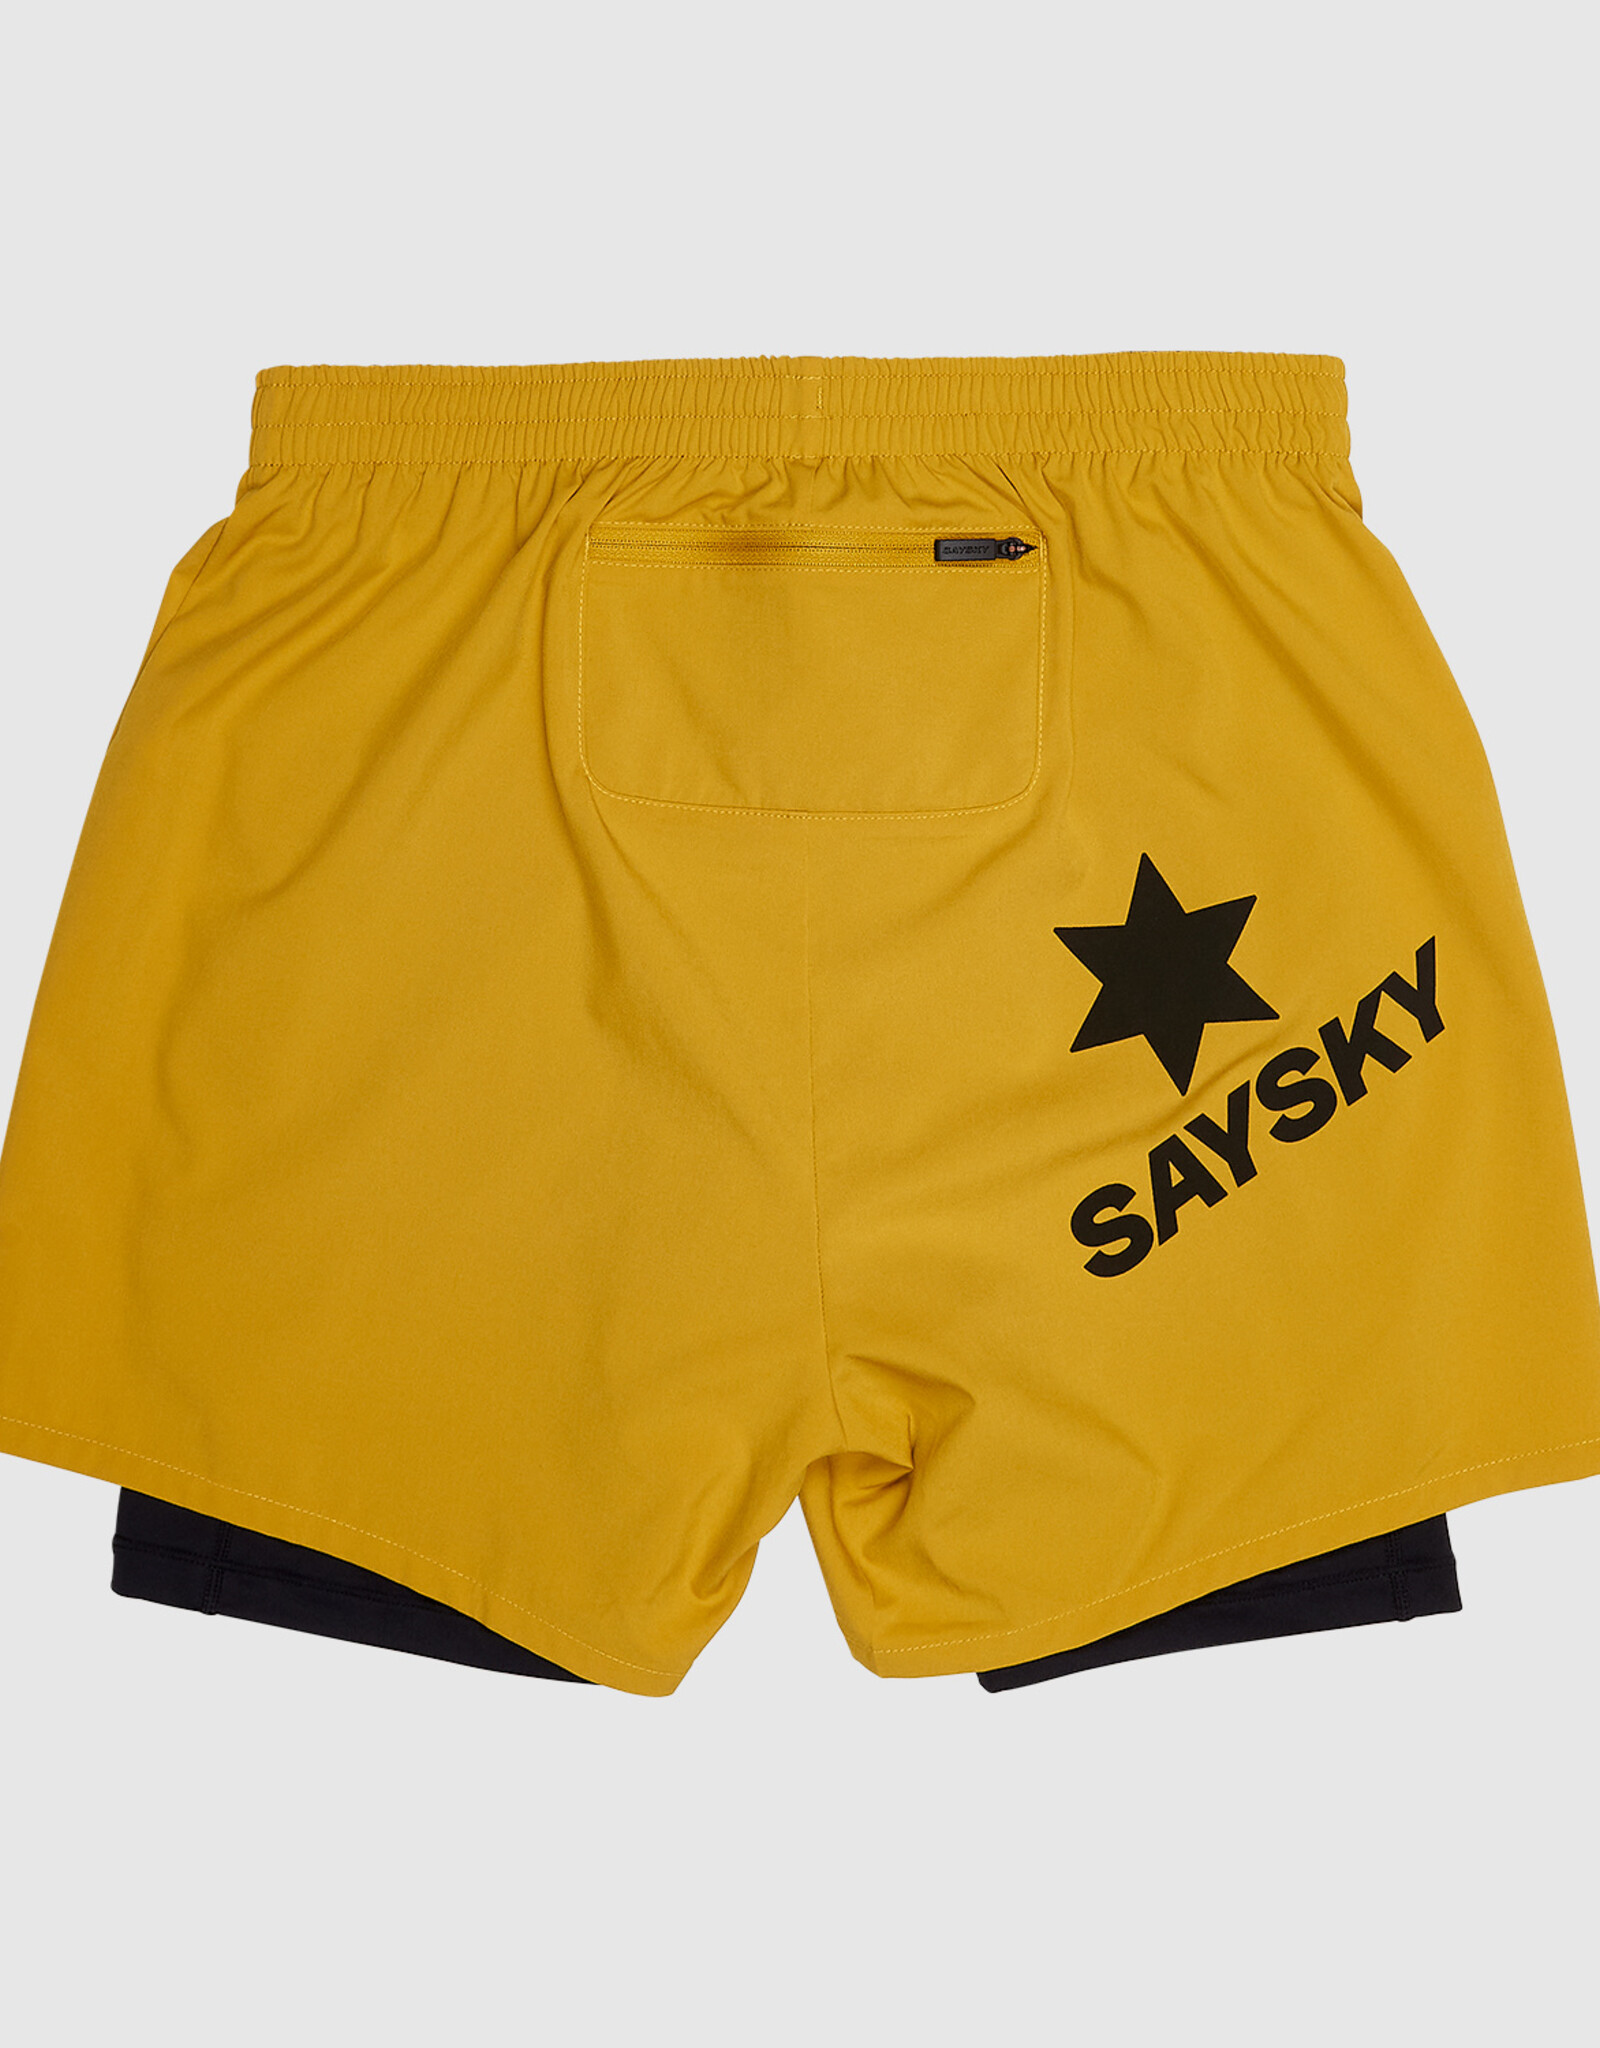 Saysky Pace 2 in 1 shorts 5" (F 23)